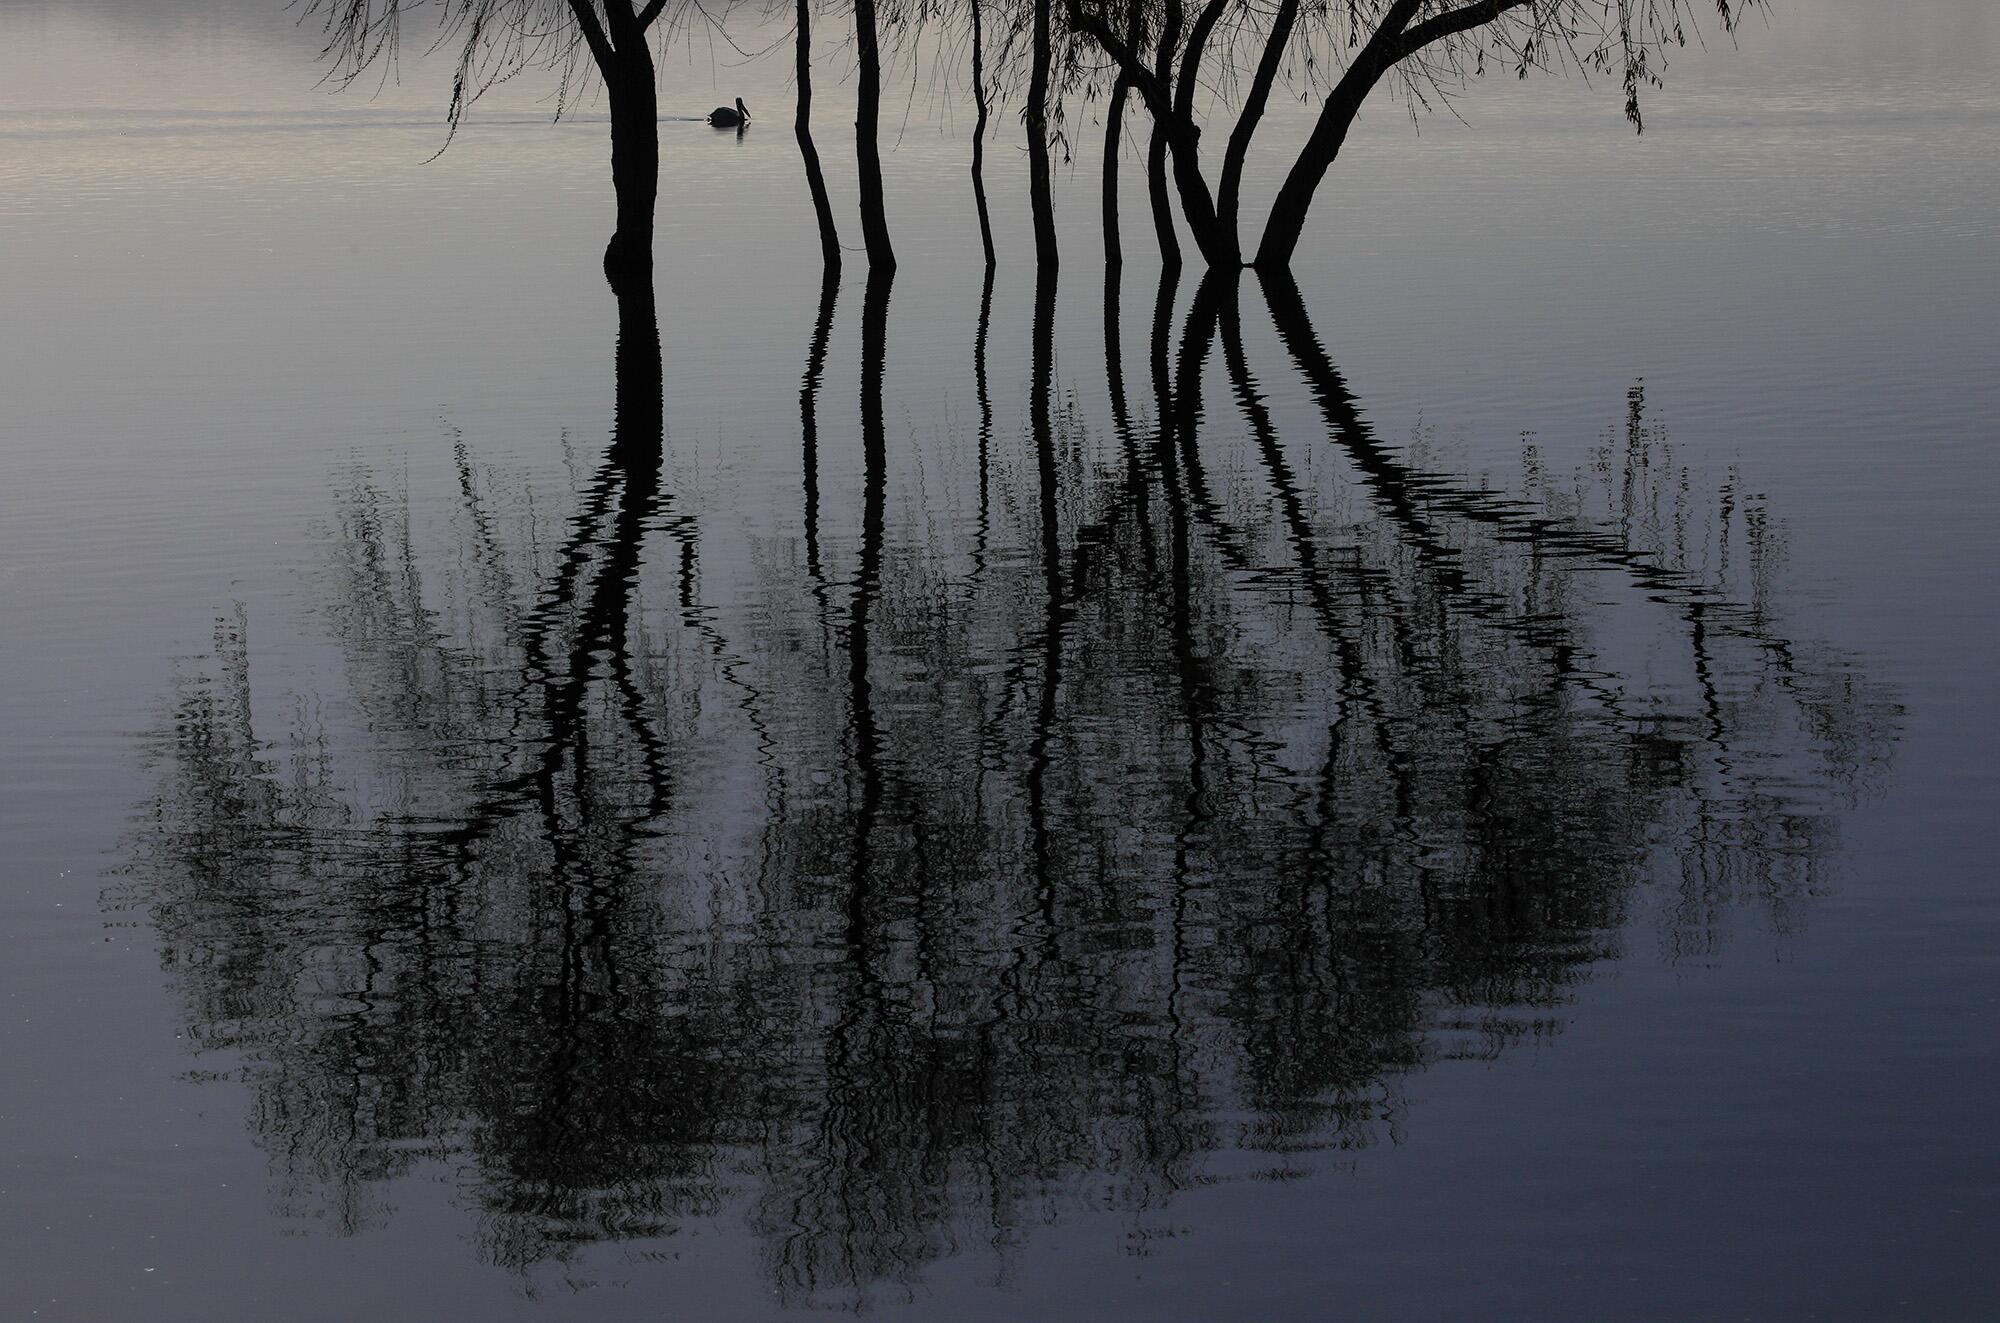 A pelican glides past the reflection of a partially submerged tree in Lake Elsinore.